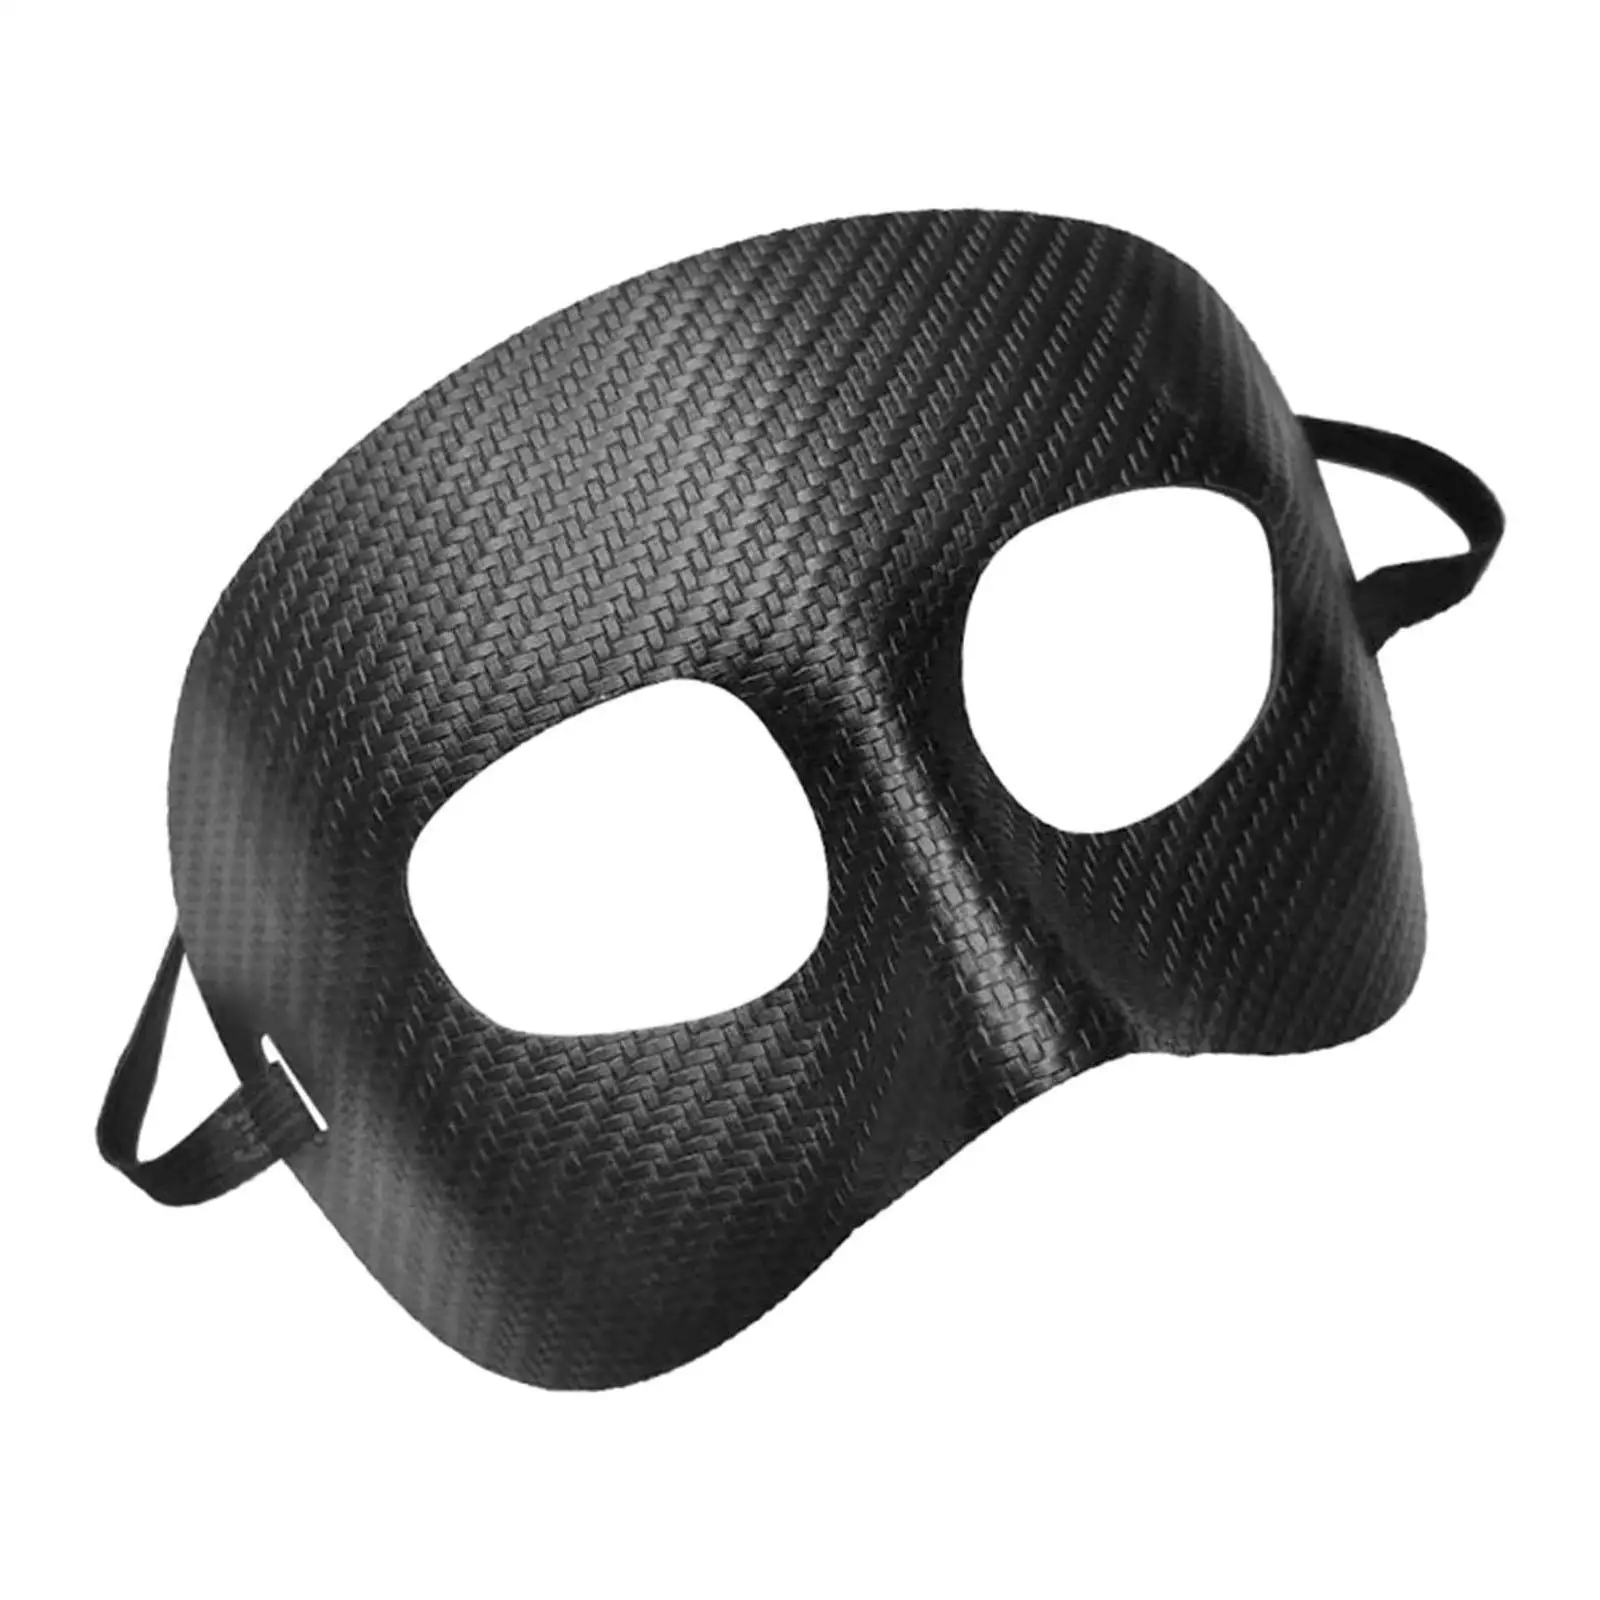 Black Basketball Face Nose Guard Shatterproof PVC with Padding